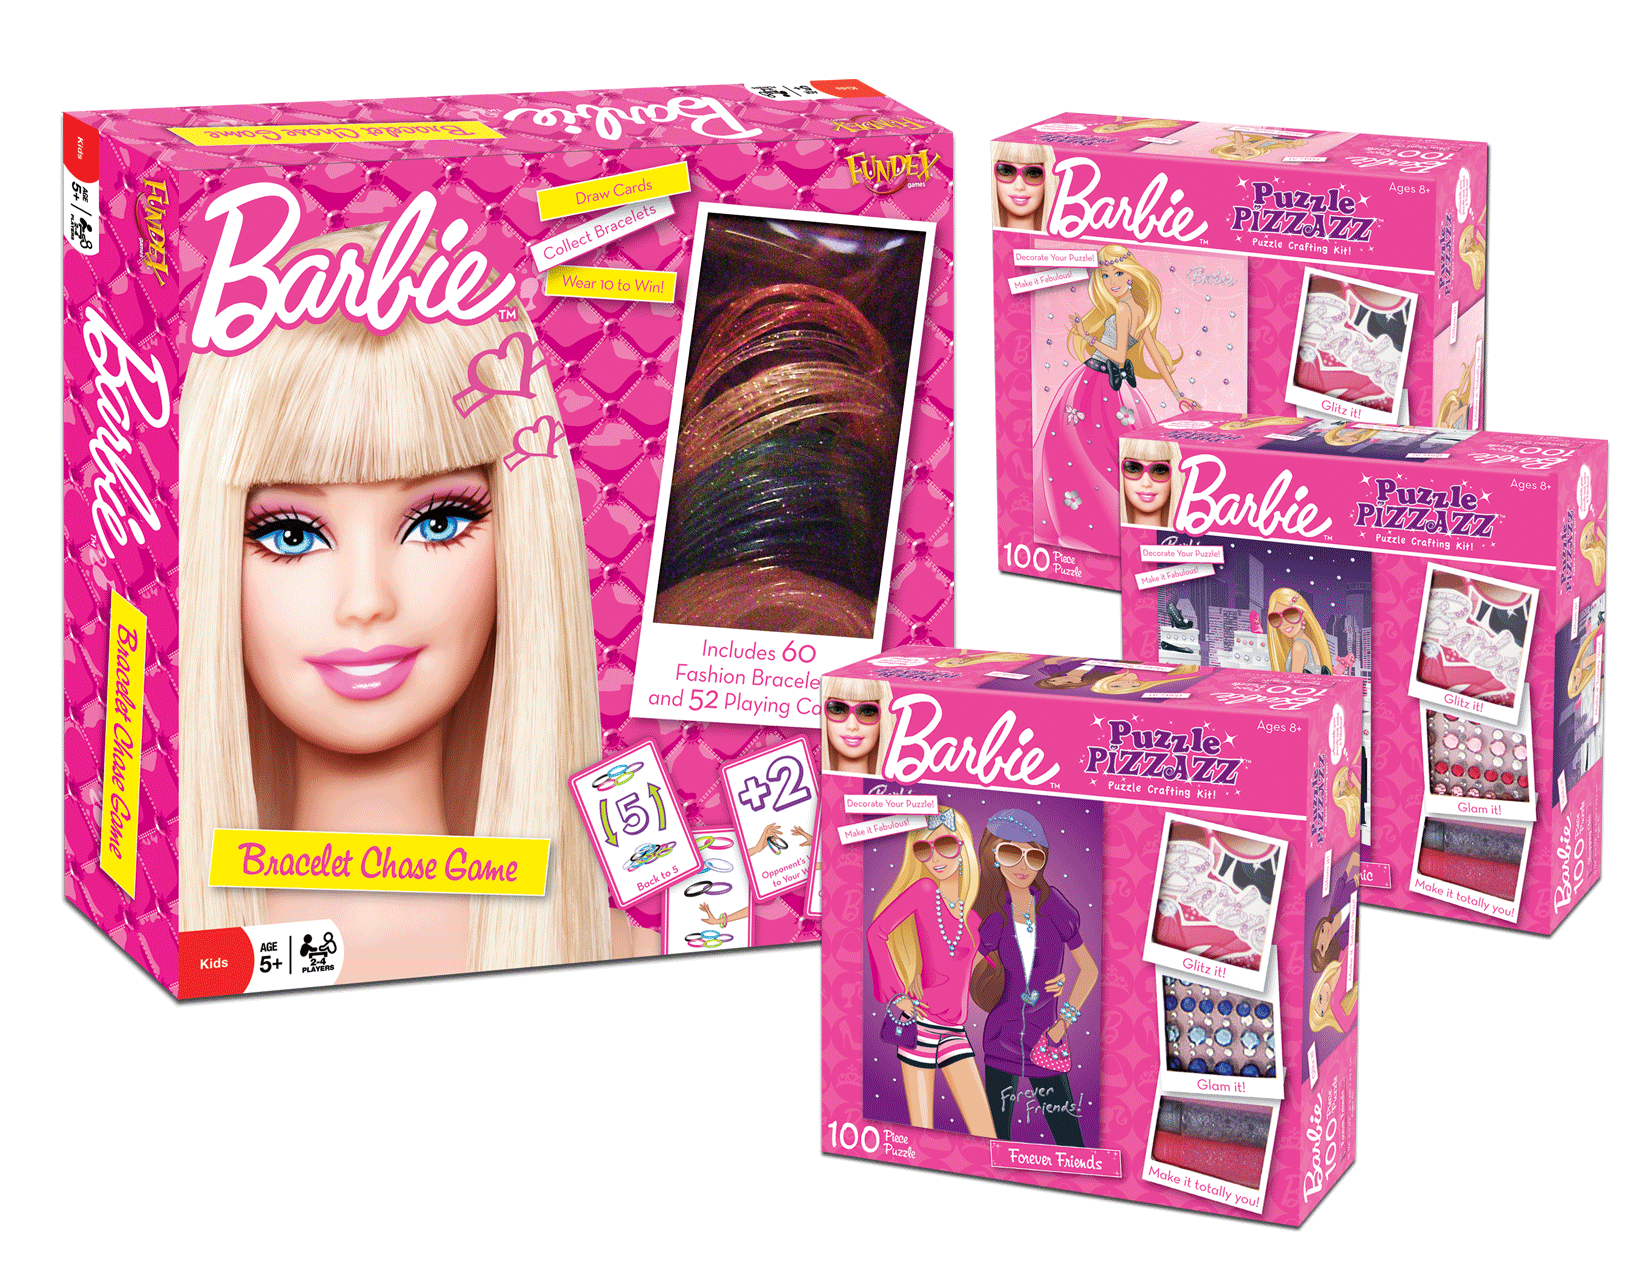 Barbie Board Game and Puzzles